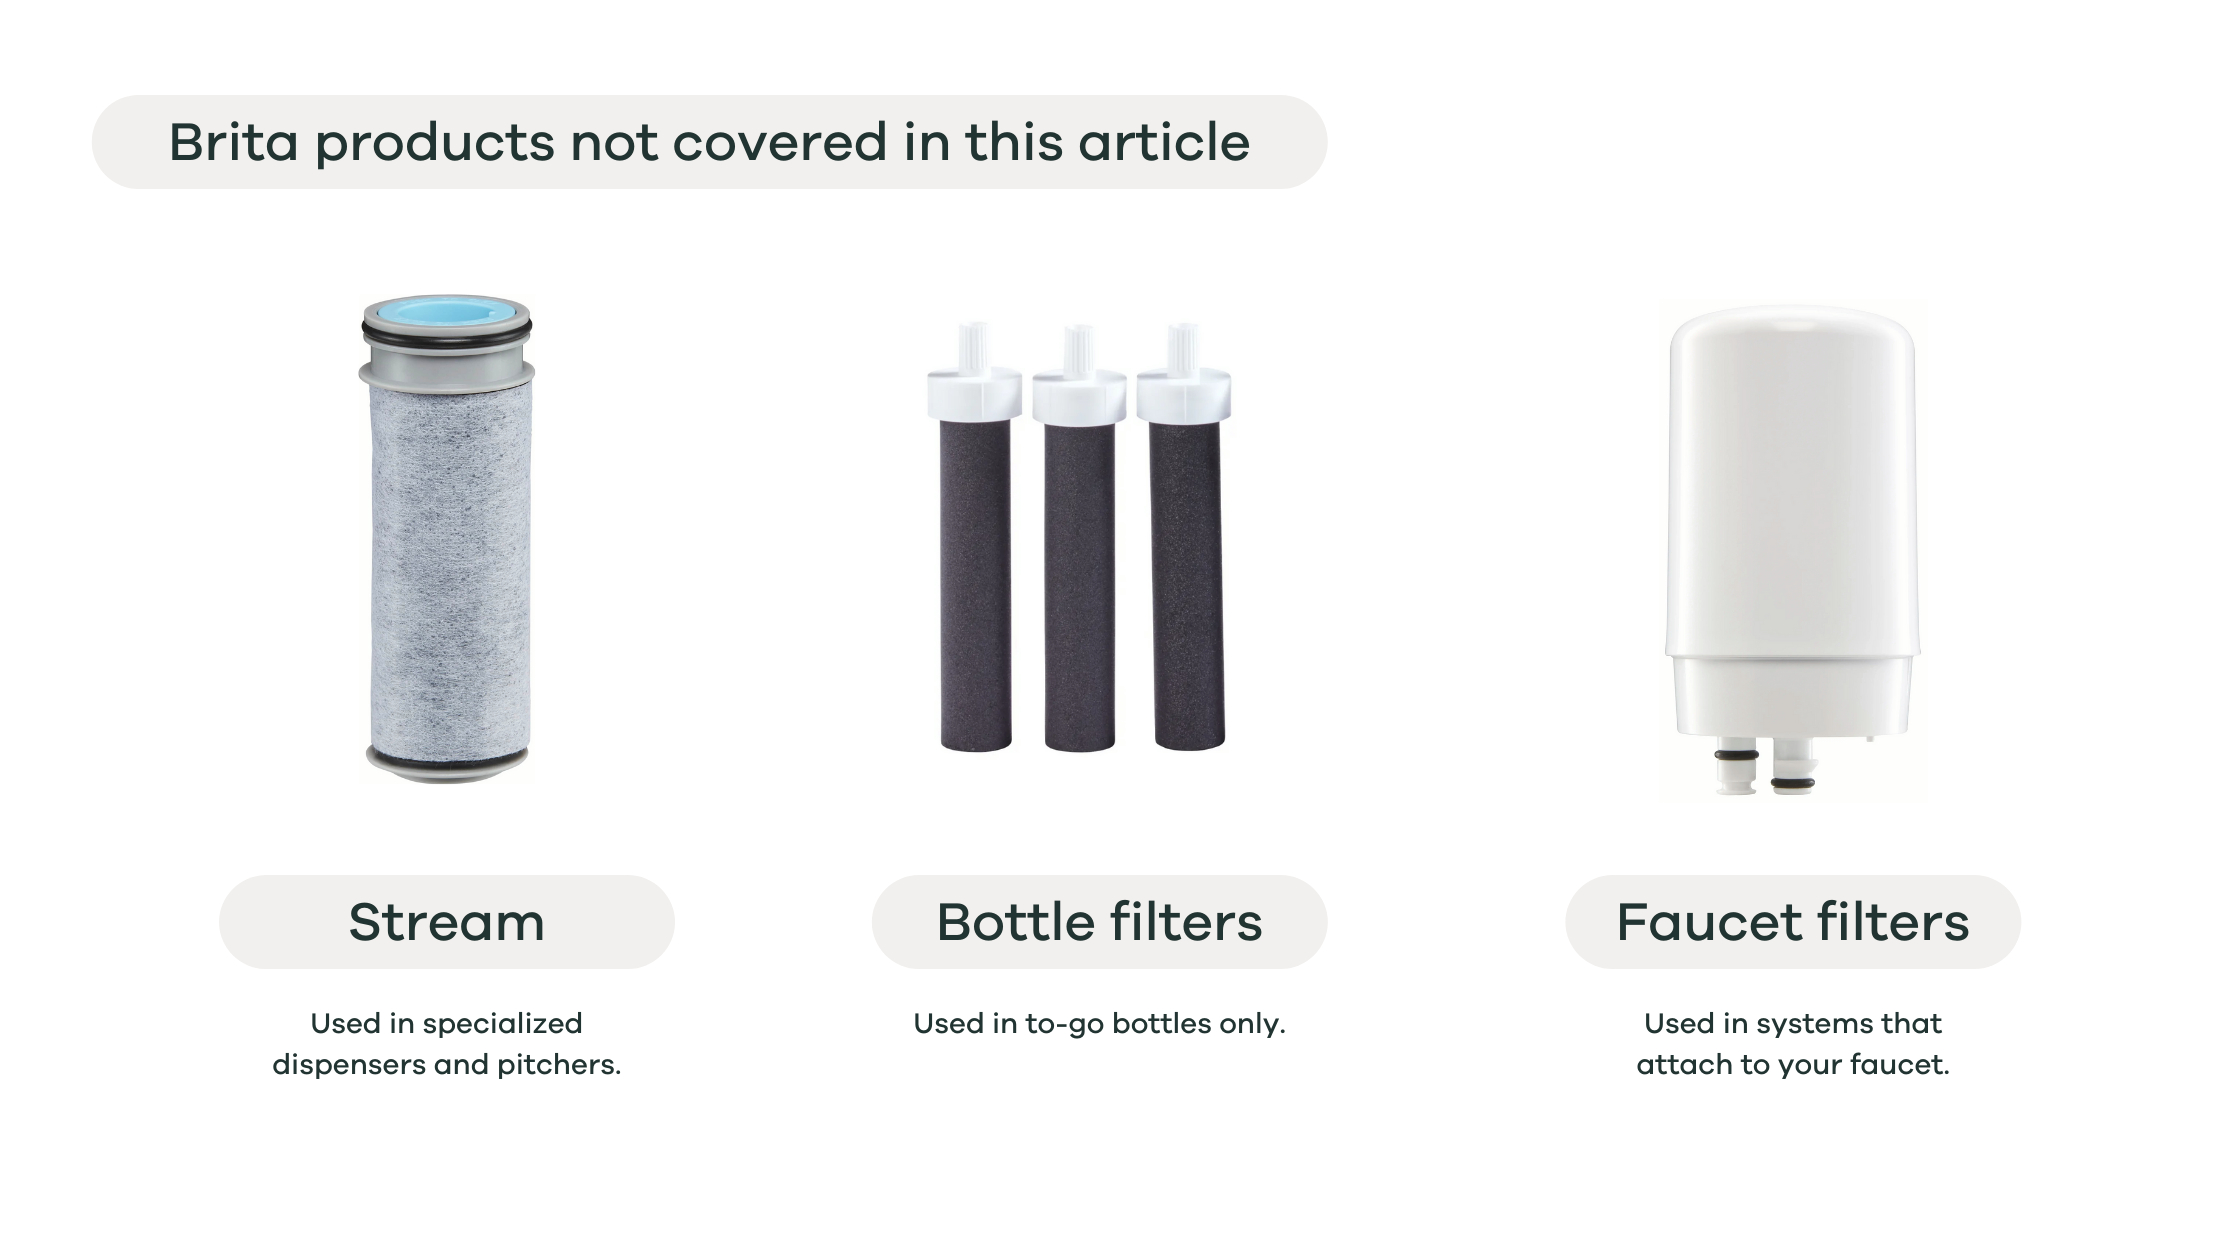 Brita filters not covered in this article